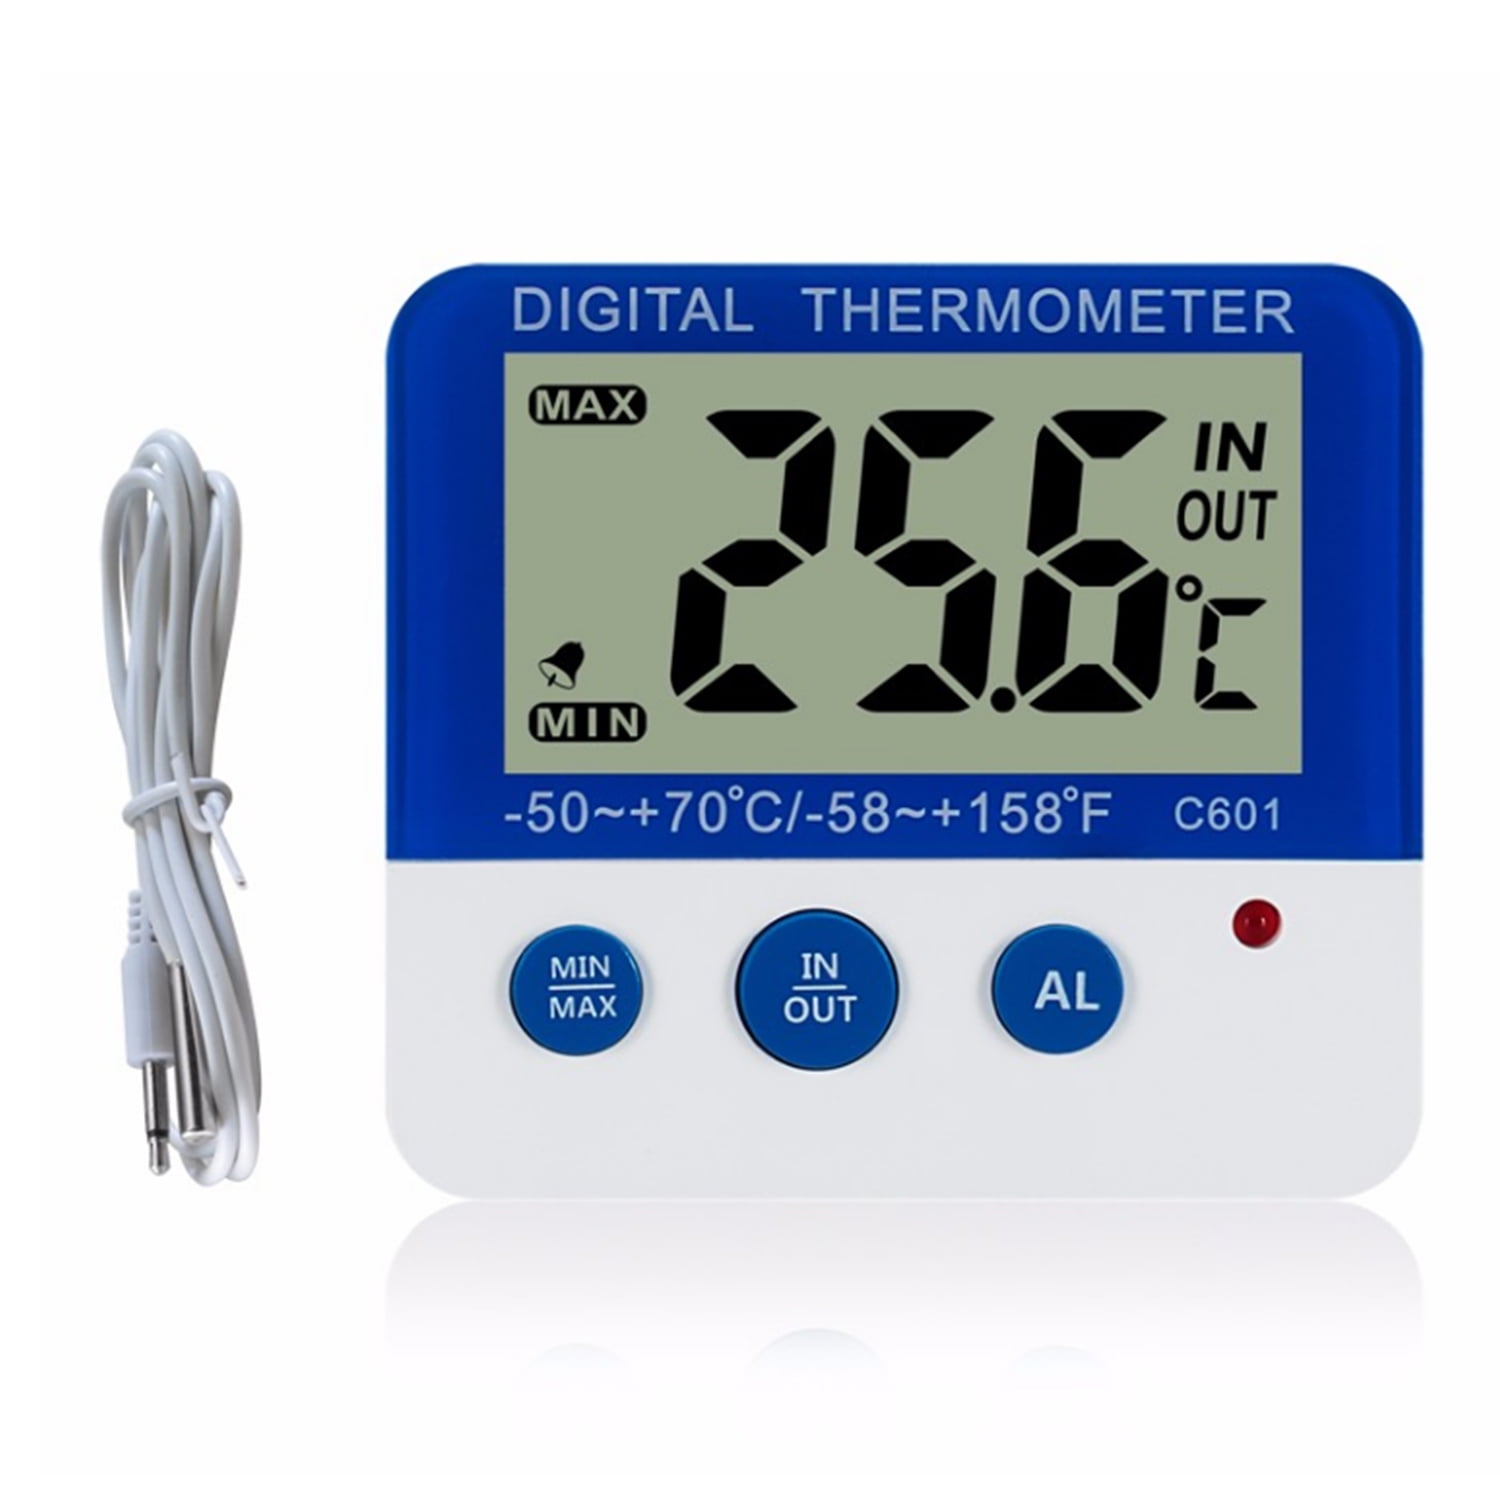 Bars LCD Display Cafes. New Refrigerator Thermometer Indoor Room Digital Fridge Freezer Thermometer Alert with a Sensor Min and Max Record Restaurants Magnet and Stand for Home